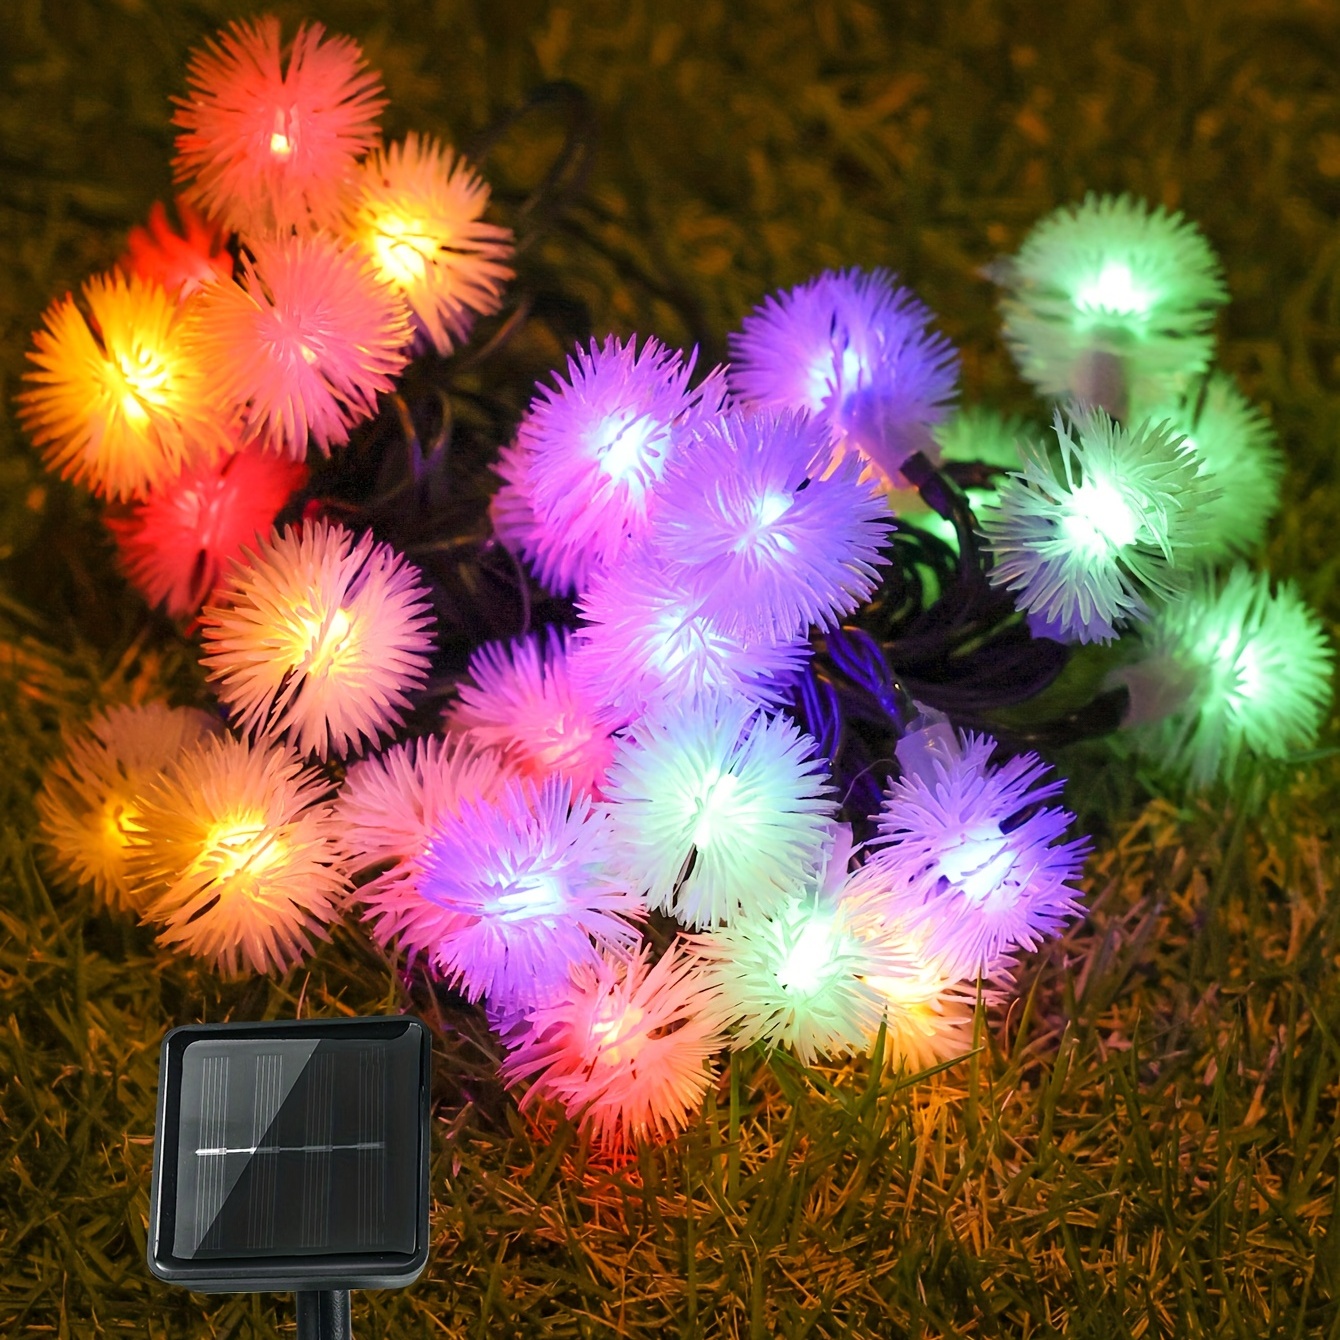 Fairy Lights Captions For Instagram That Are So Merry & Bright